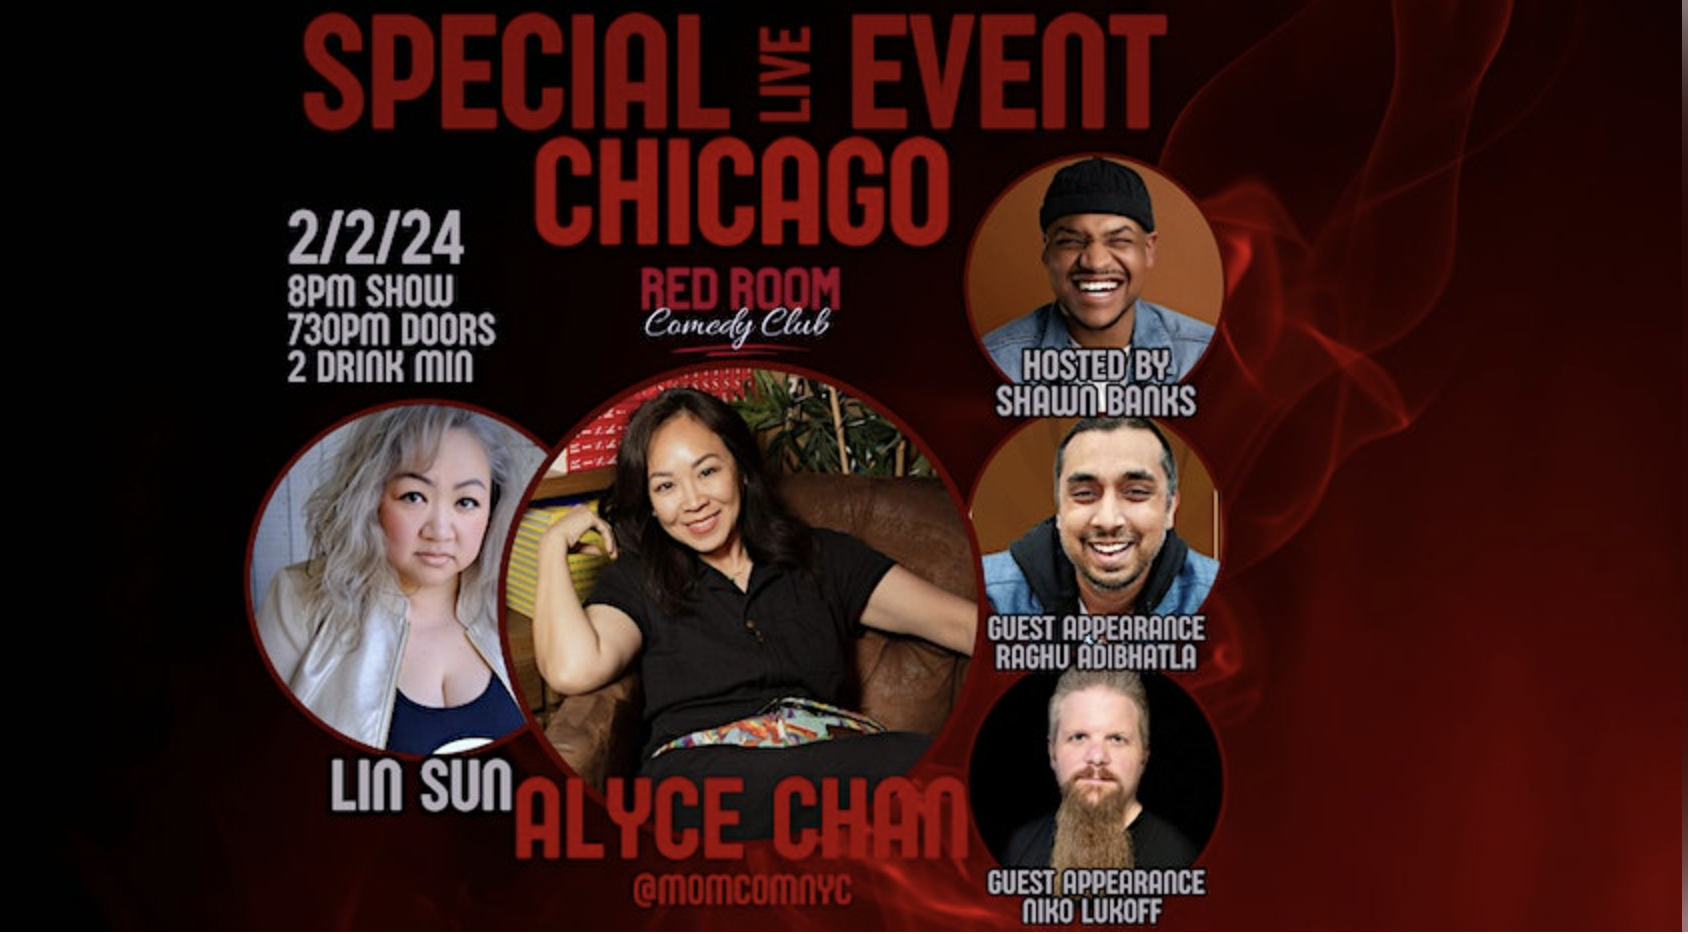 Feb 2 – Opening Night at The Red Room, Chicago